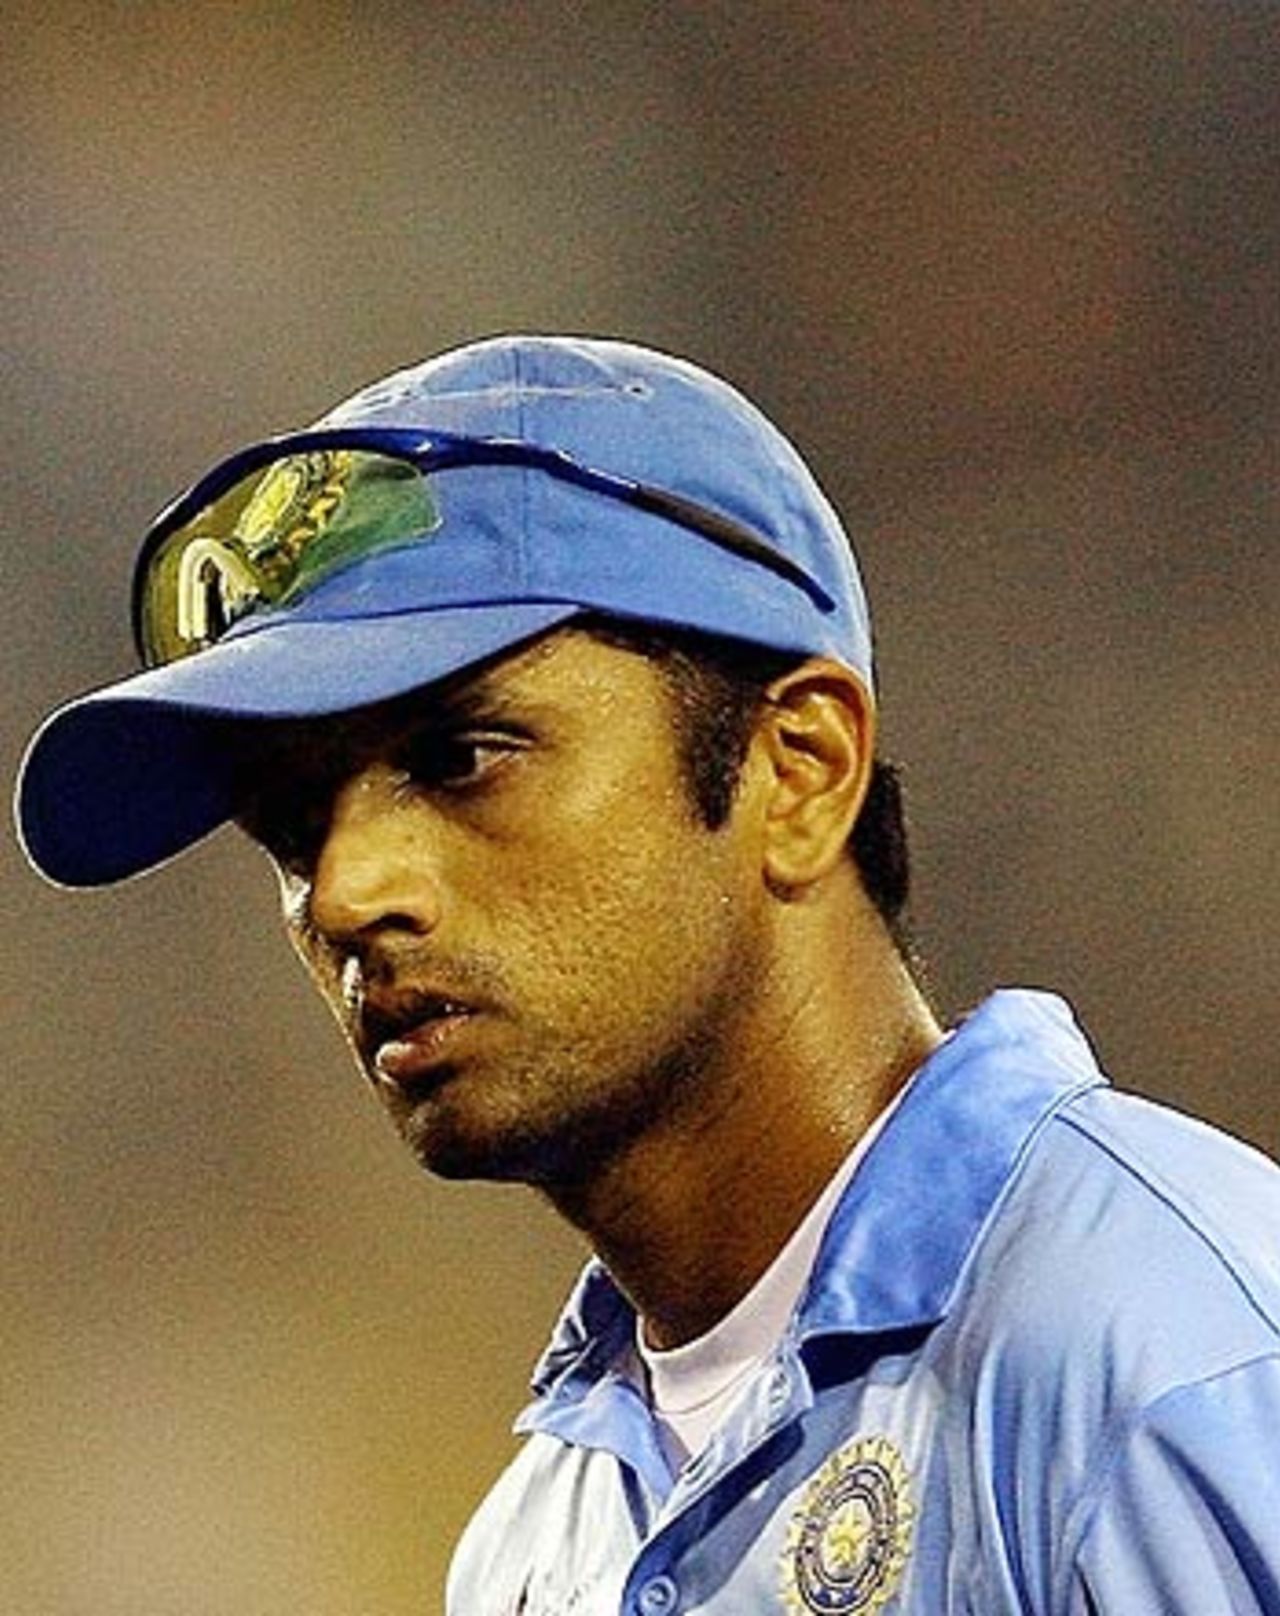 Rahul Dravid walks back after a close defeat, India v West Indies, Champions Trophy, 9th match, Ahmedabad, October 26, 2007